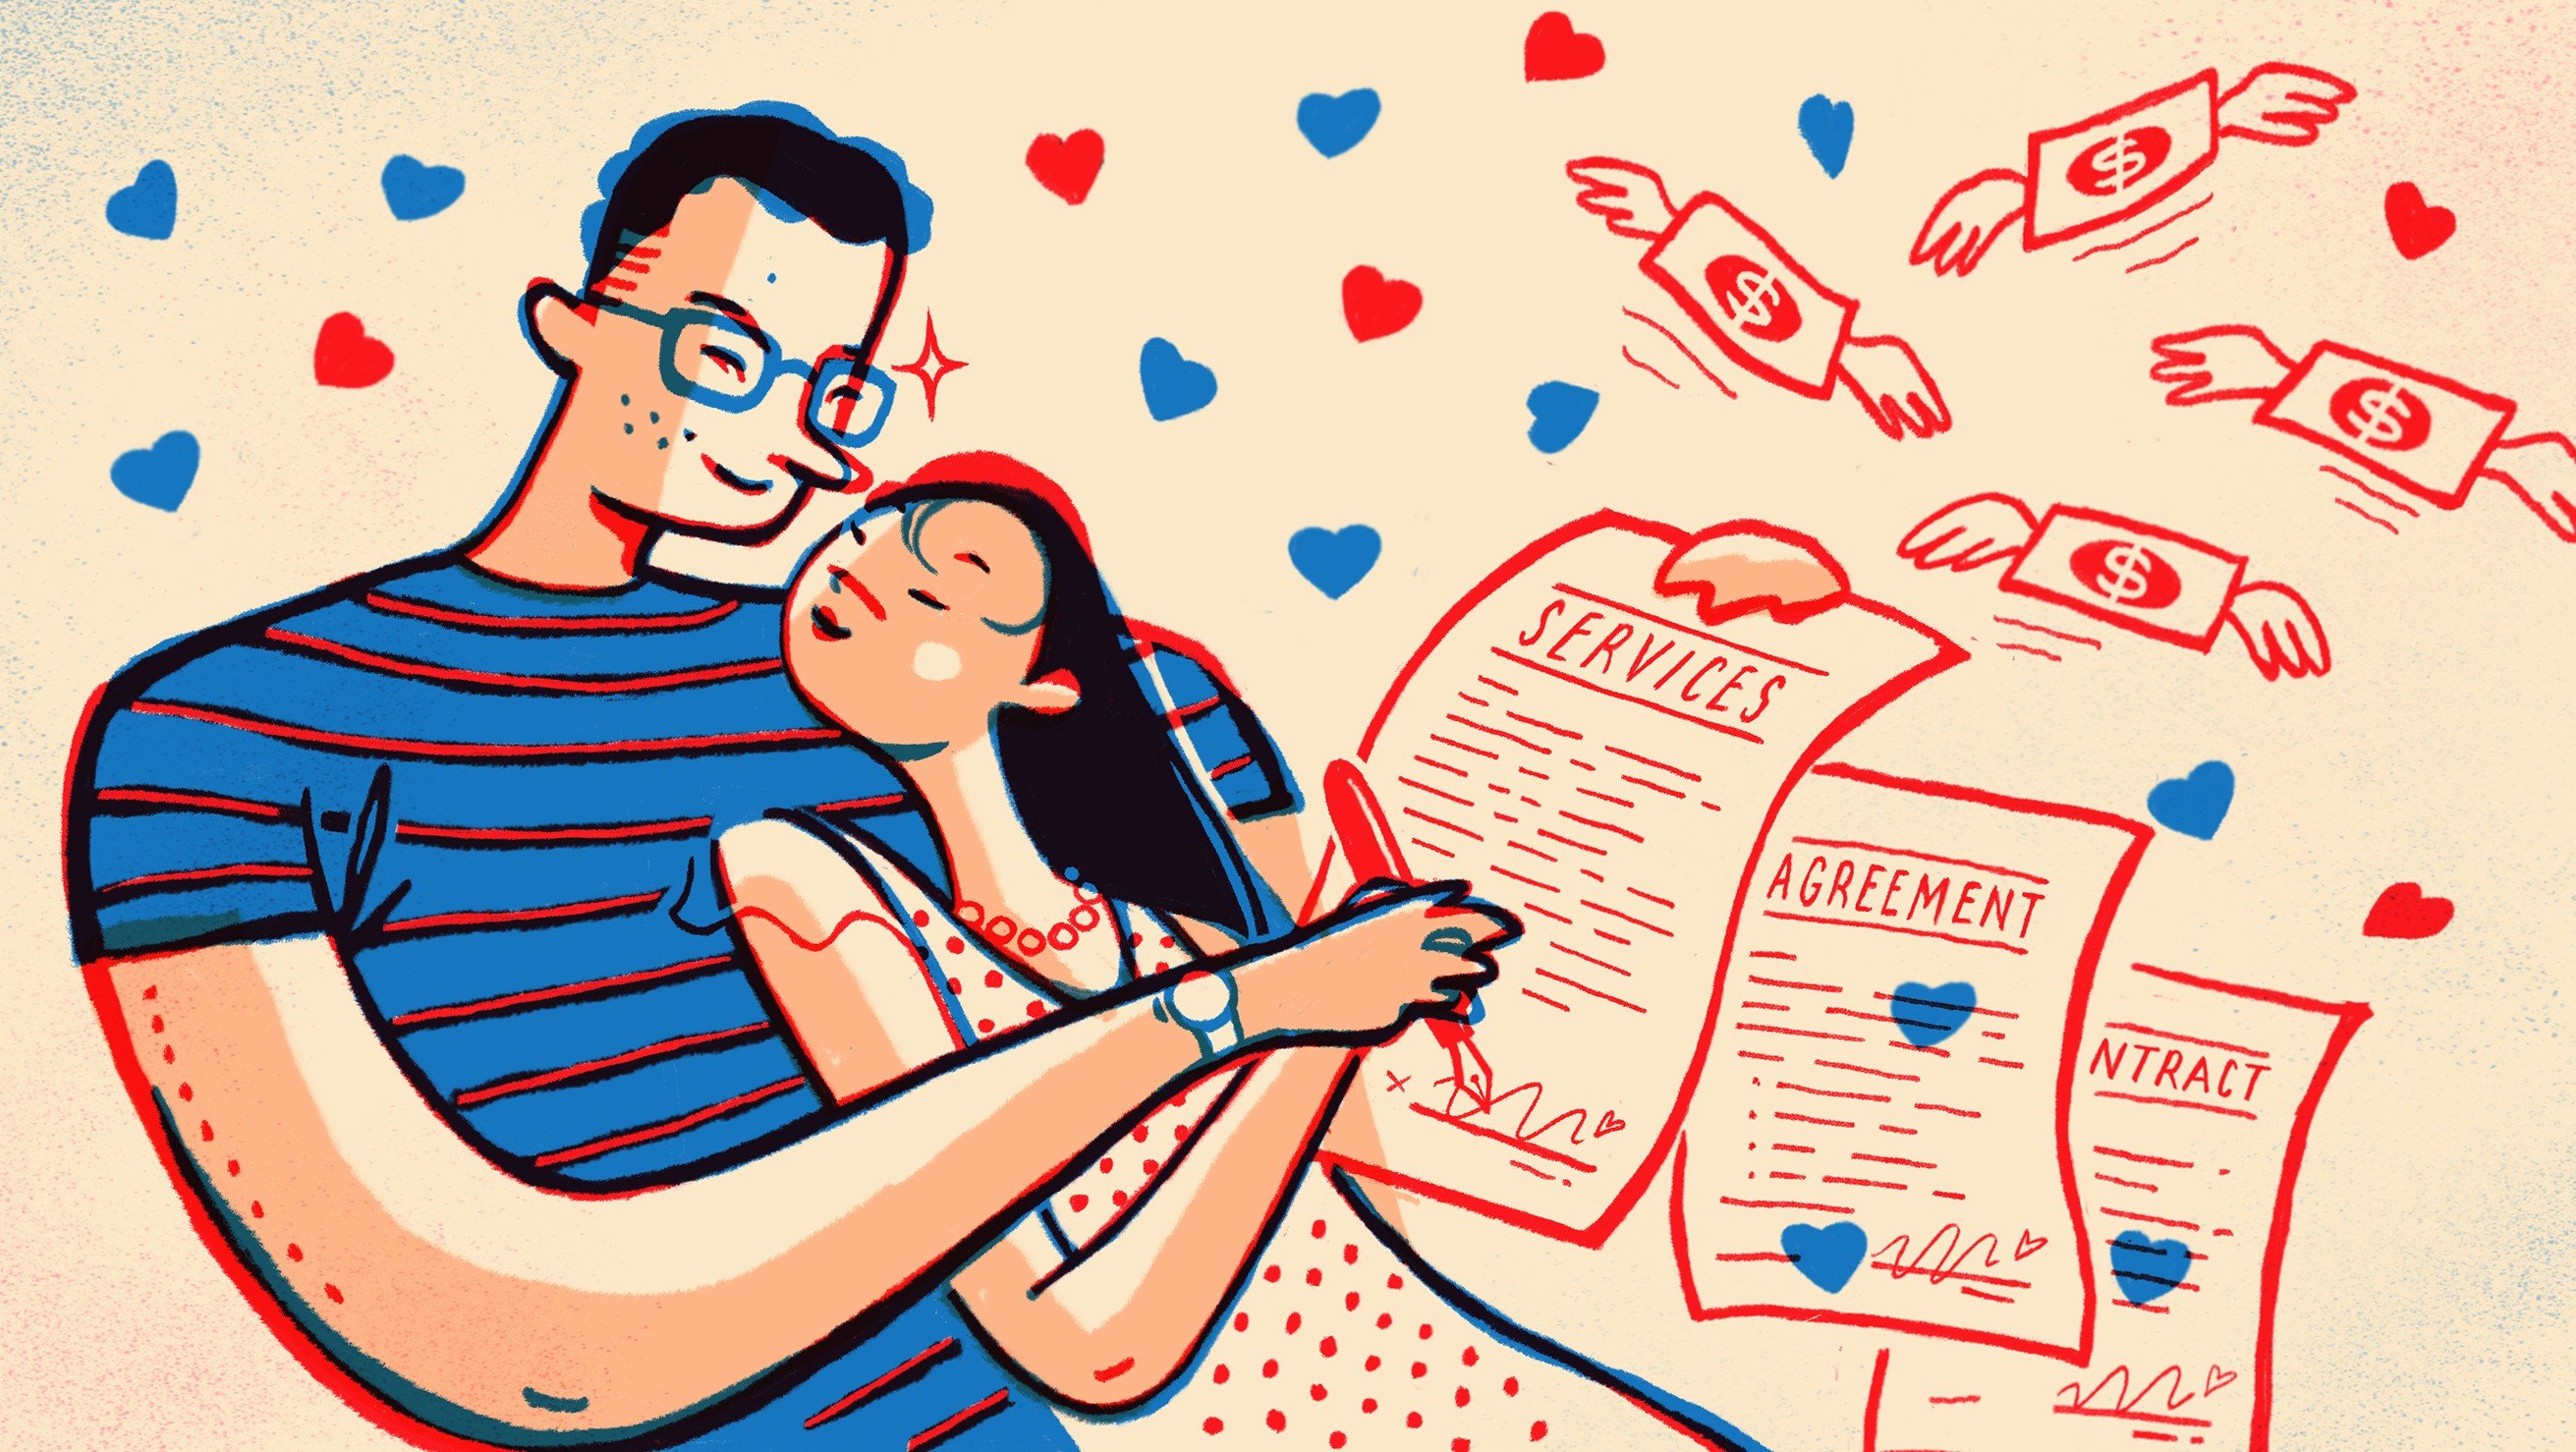 Hong Kong online romance scams rose 422 per cent from 2016 to 2018, according to police figures. Illustration: Perry Tse